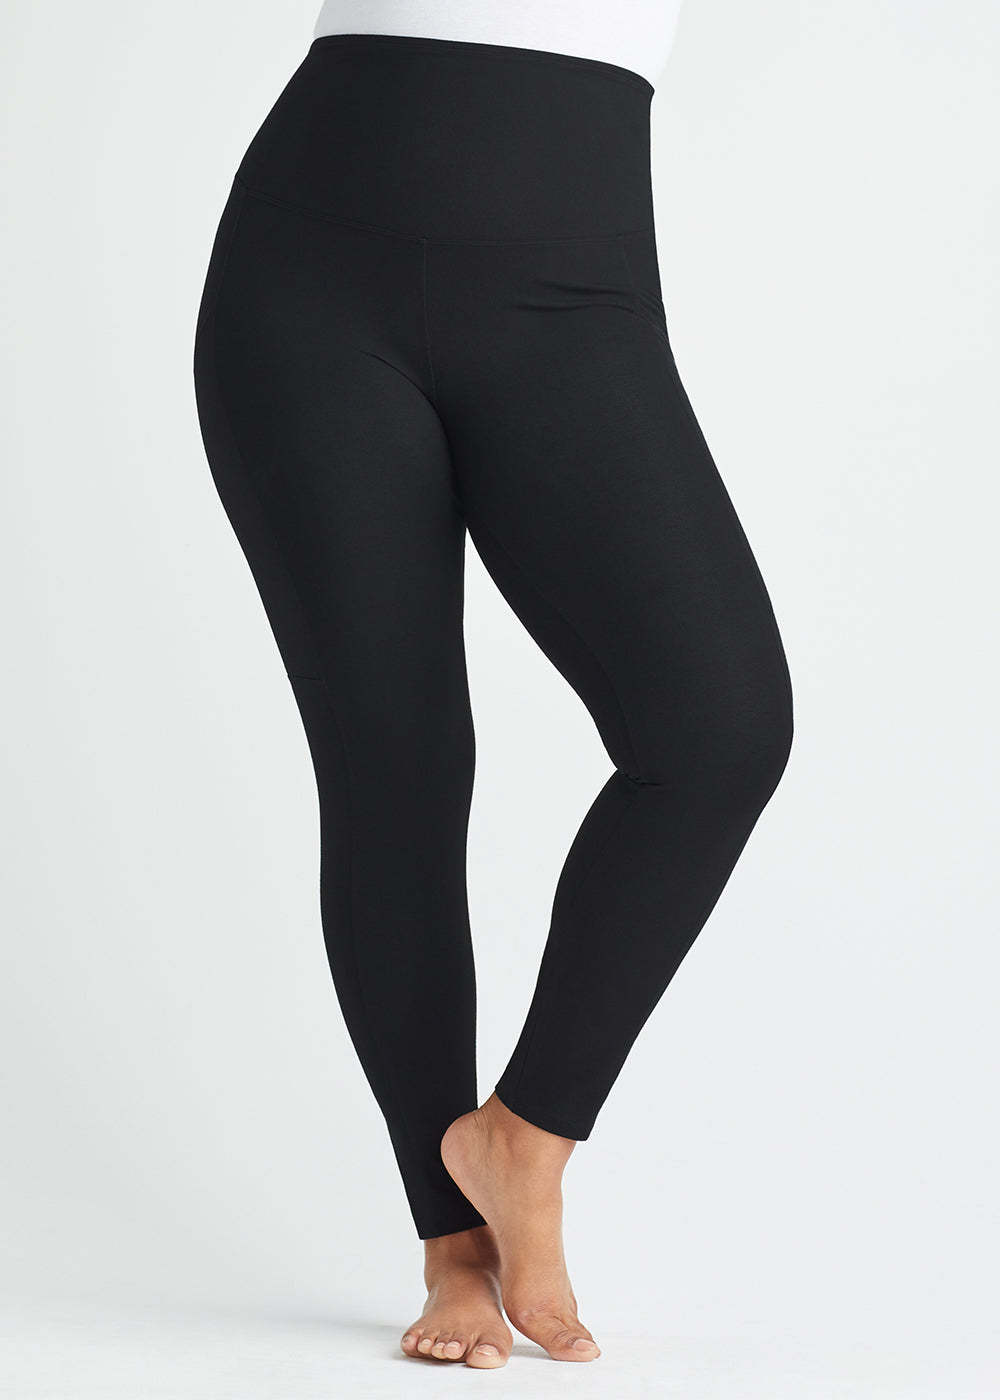 Leggings with Side Pockets